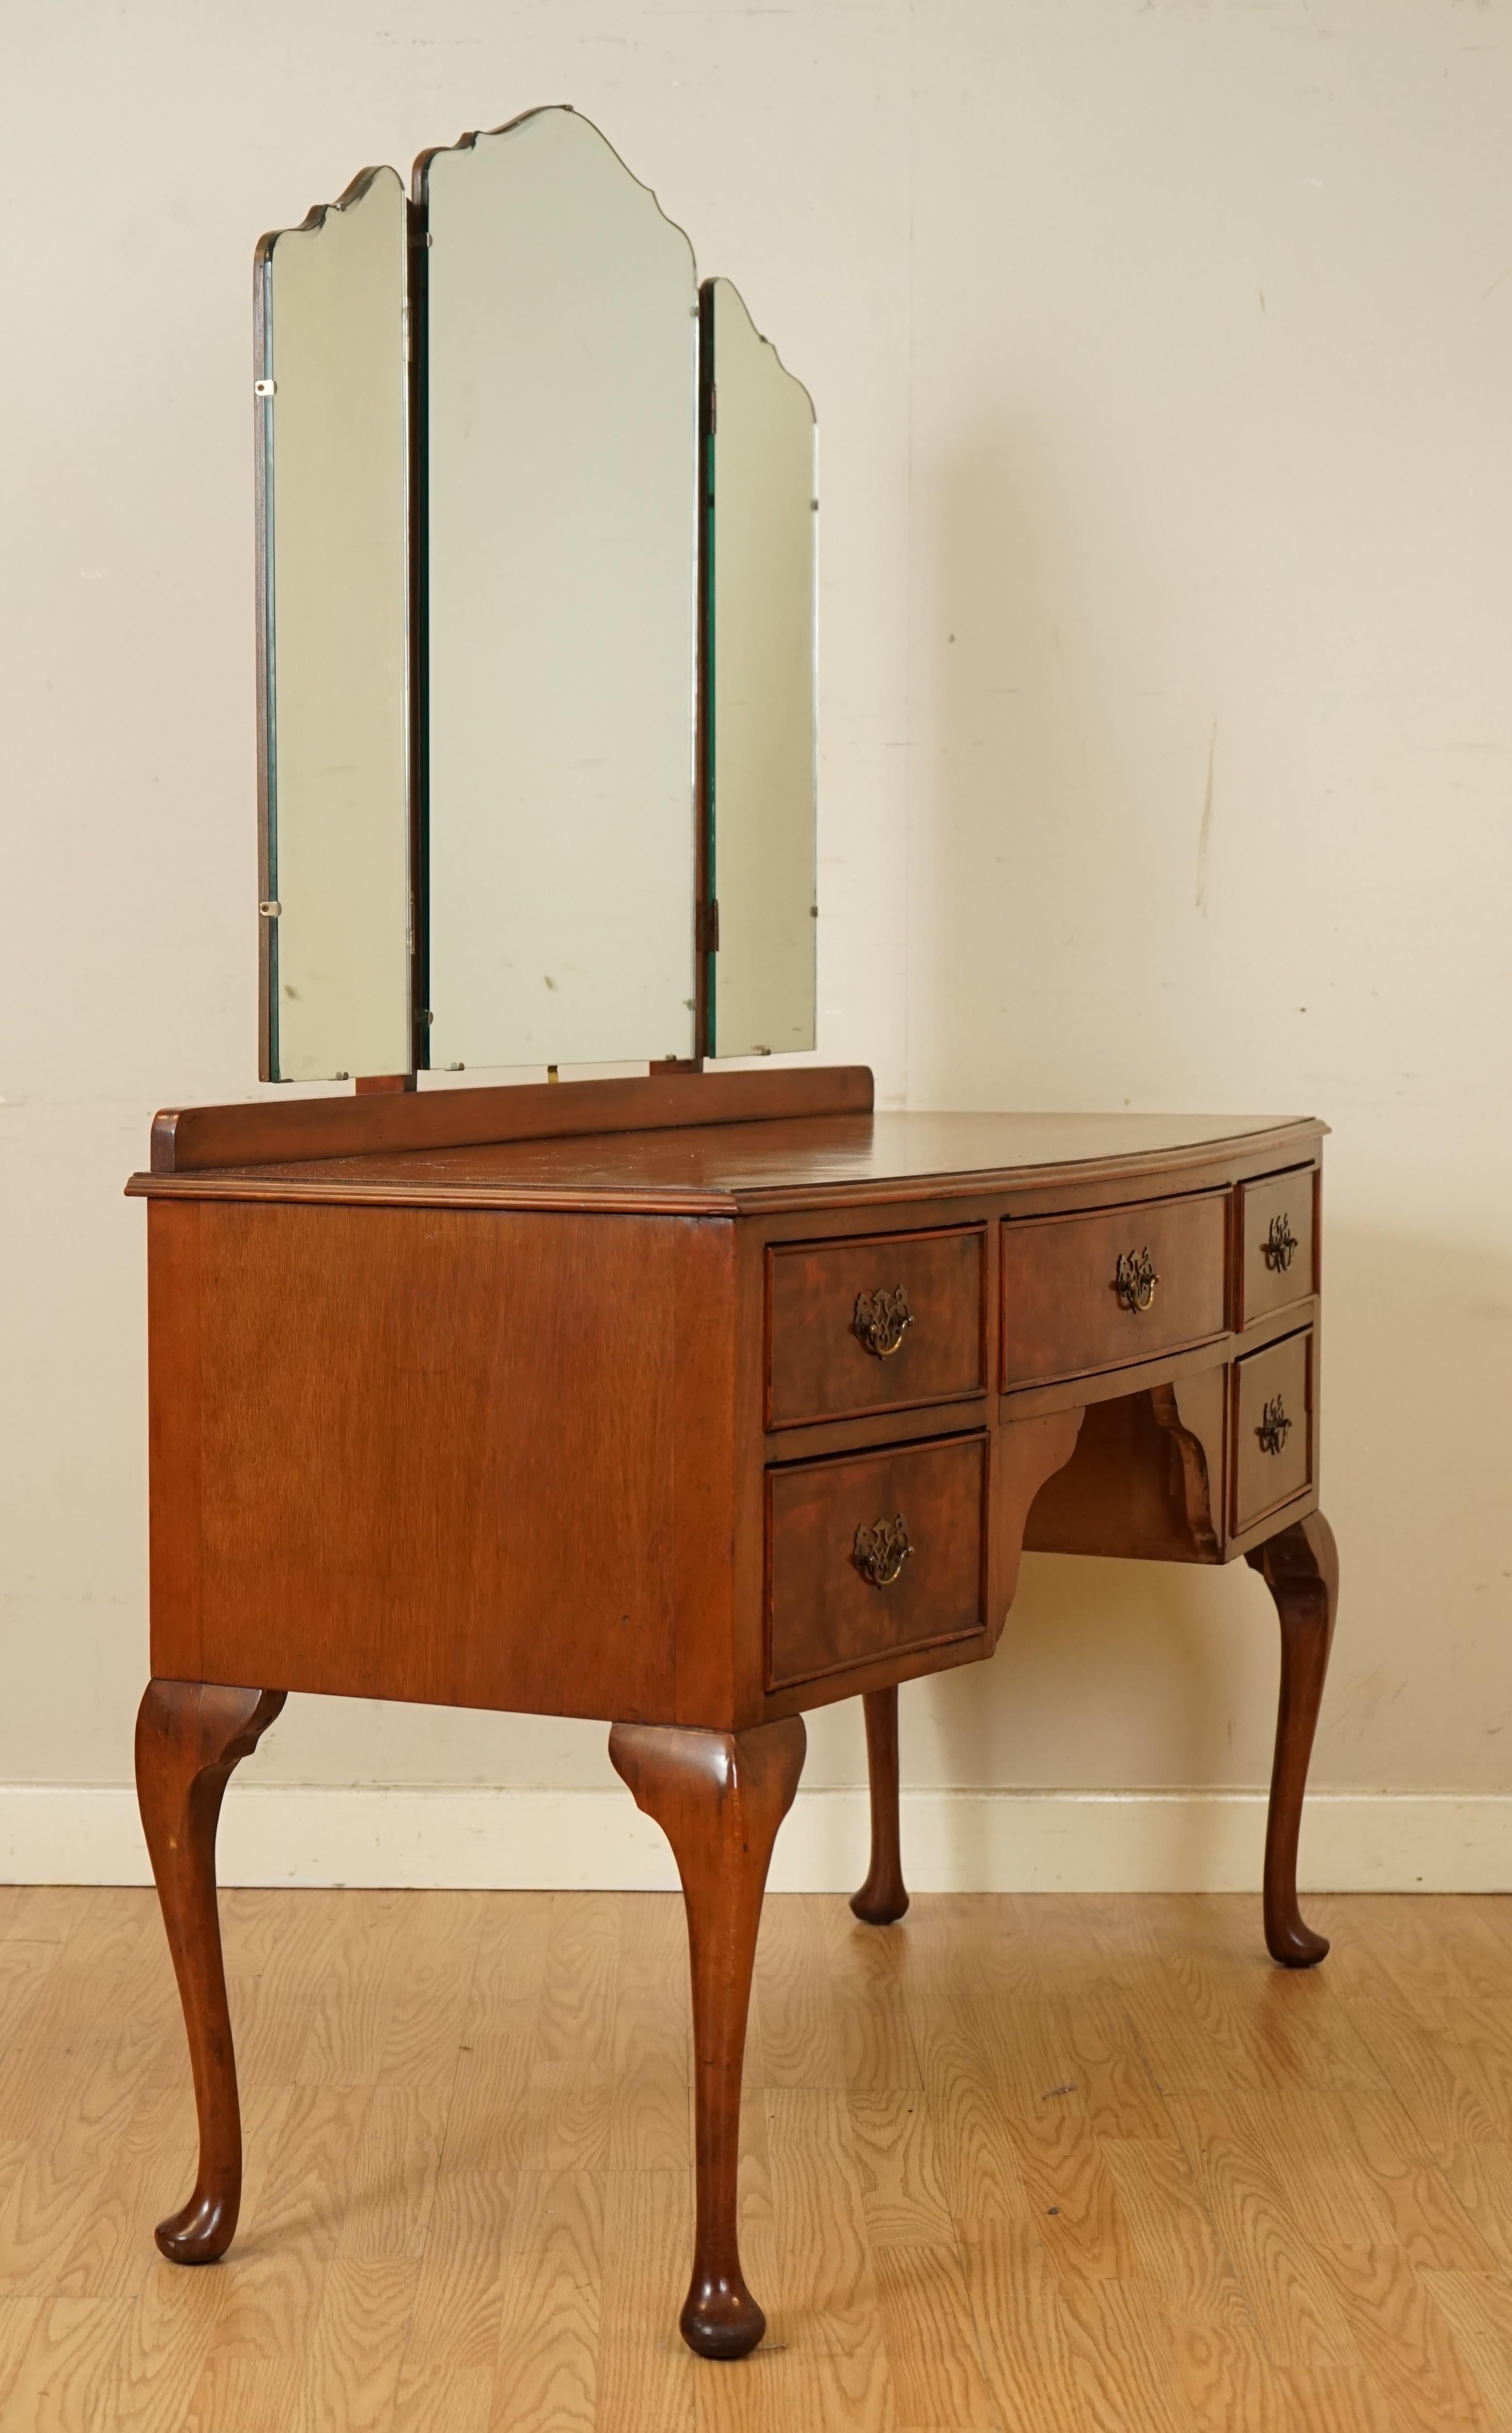 TEAK Wood Queen Anne style dressing table with mirror and stool 